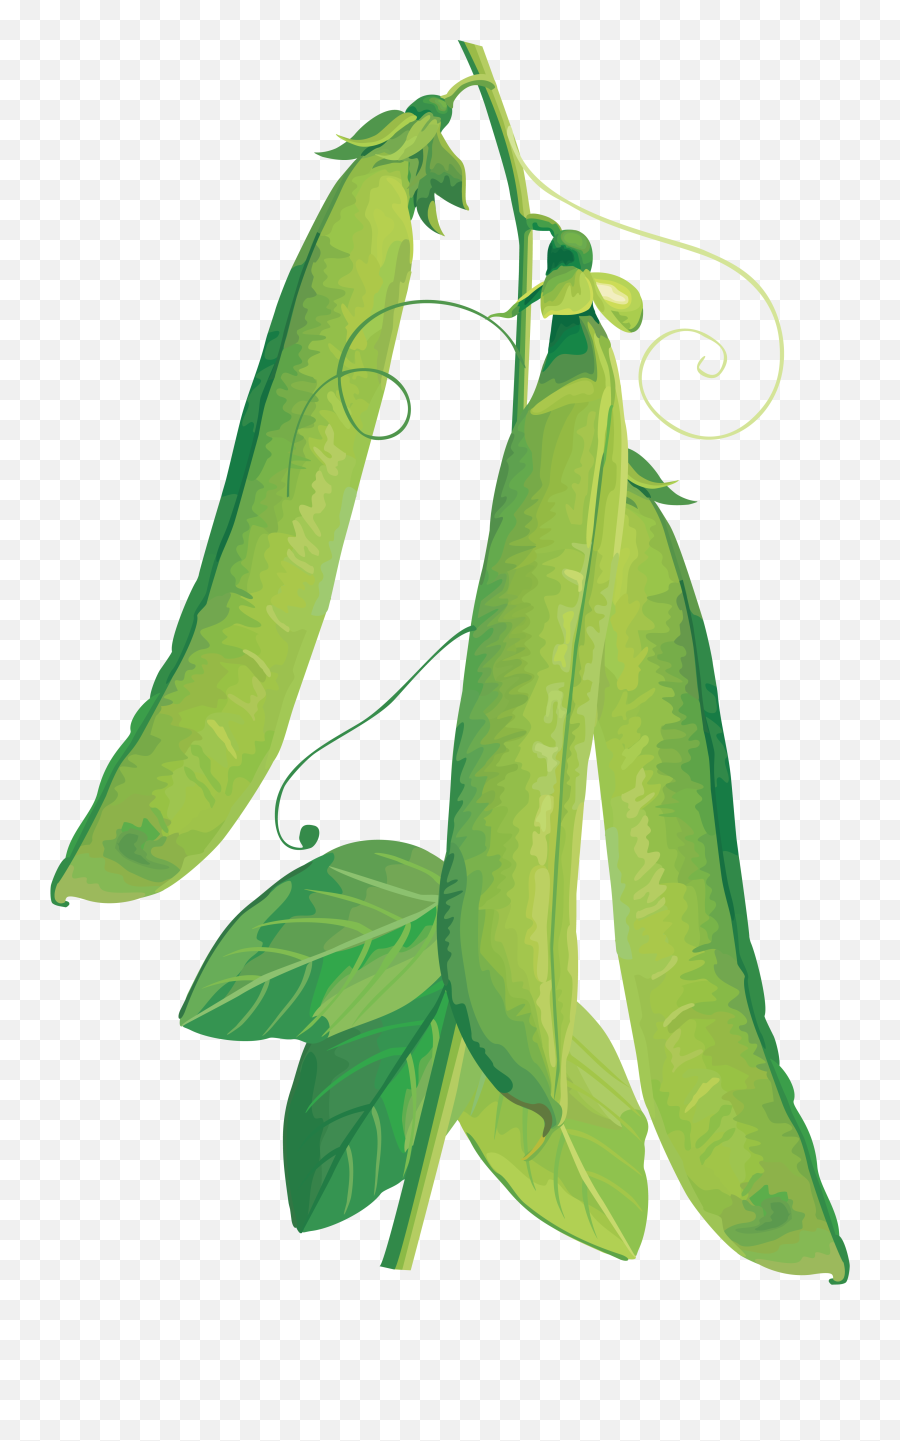 Pea Png Image - Purepng Free Transparent Cc0 Png Image Library Vegetables Vector,Peas Png